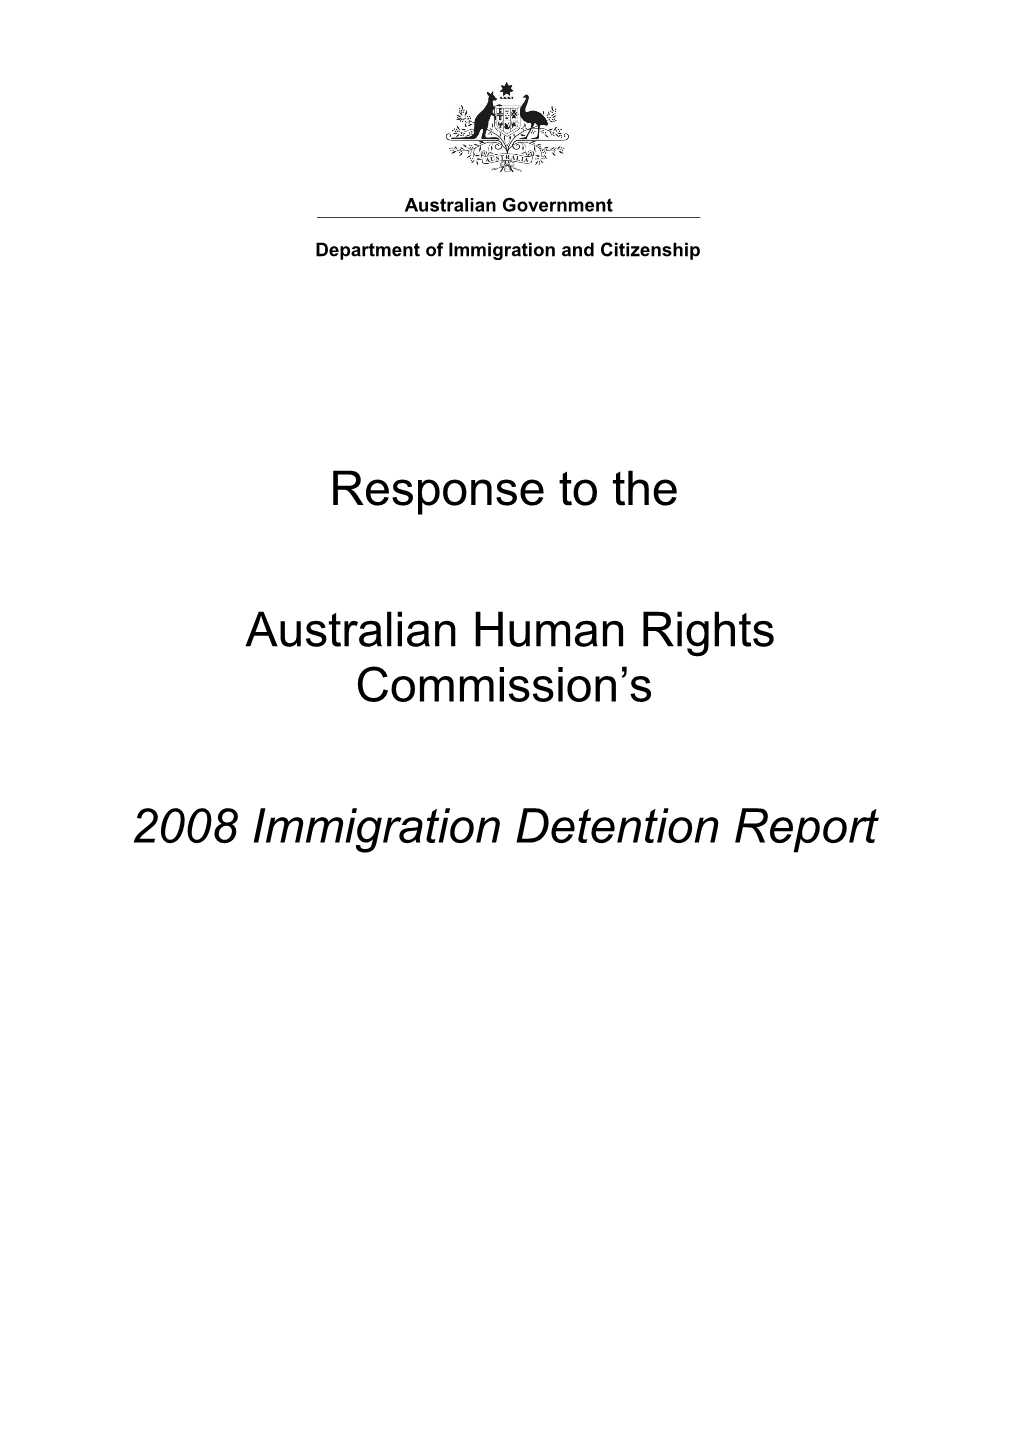 Department of Immigration and Citizenship - Response to Australian Human Rights Commission S